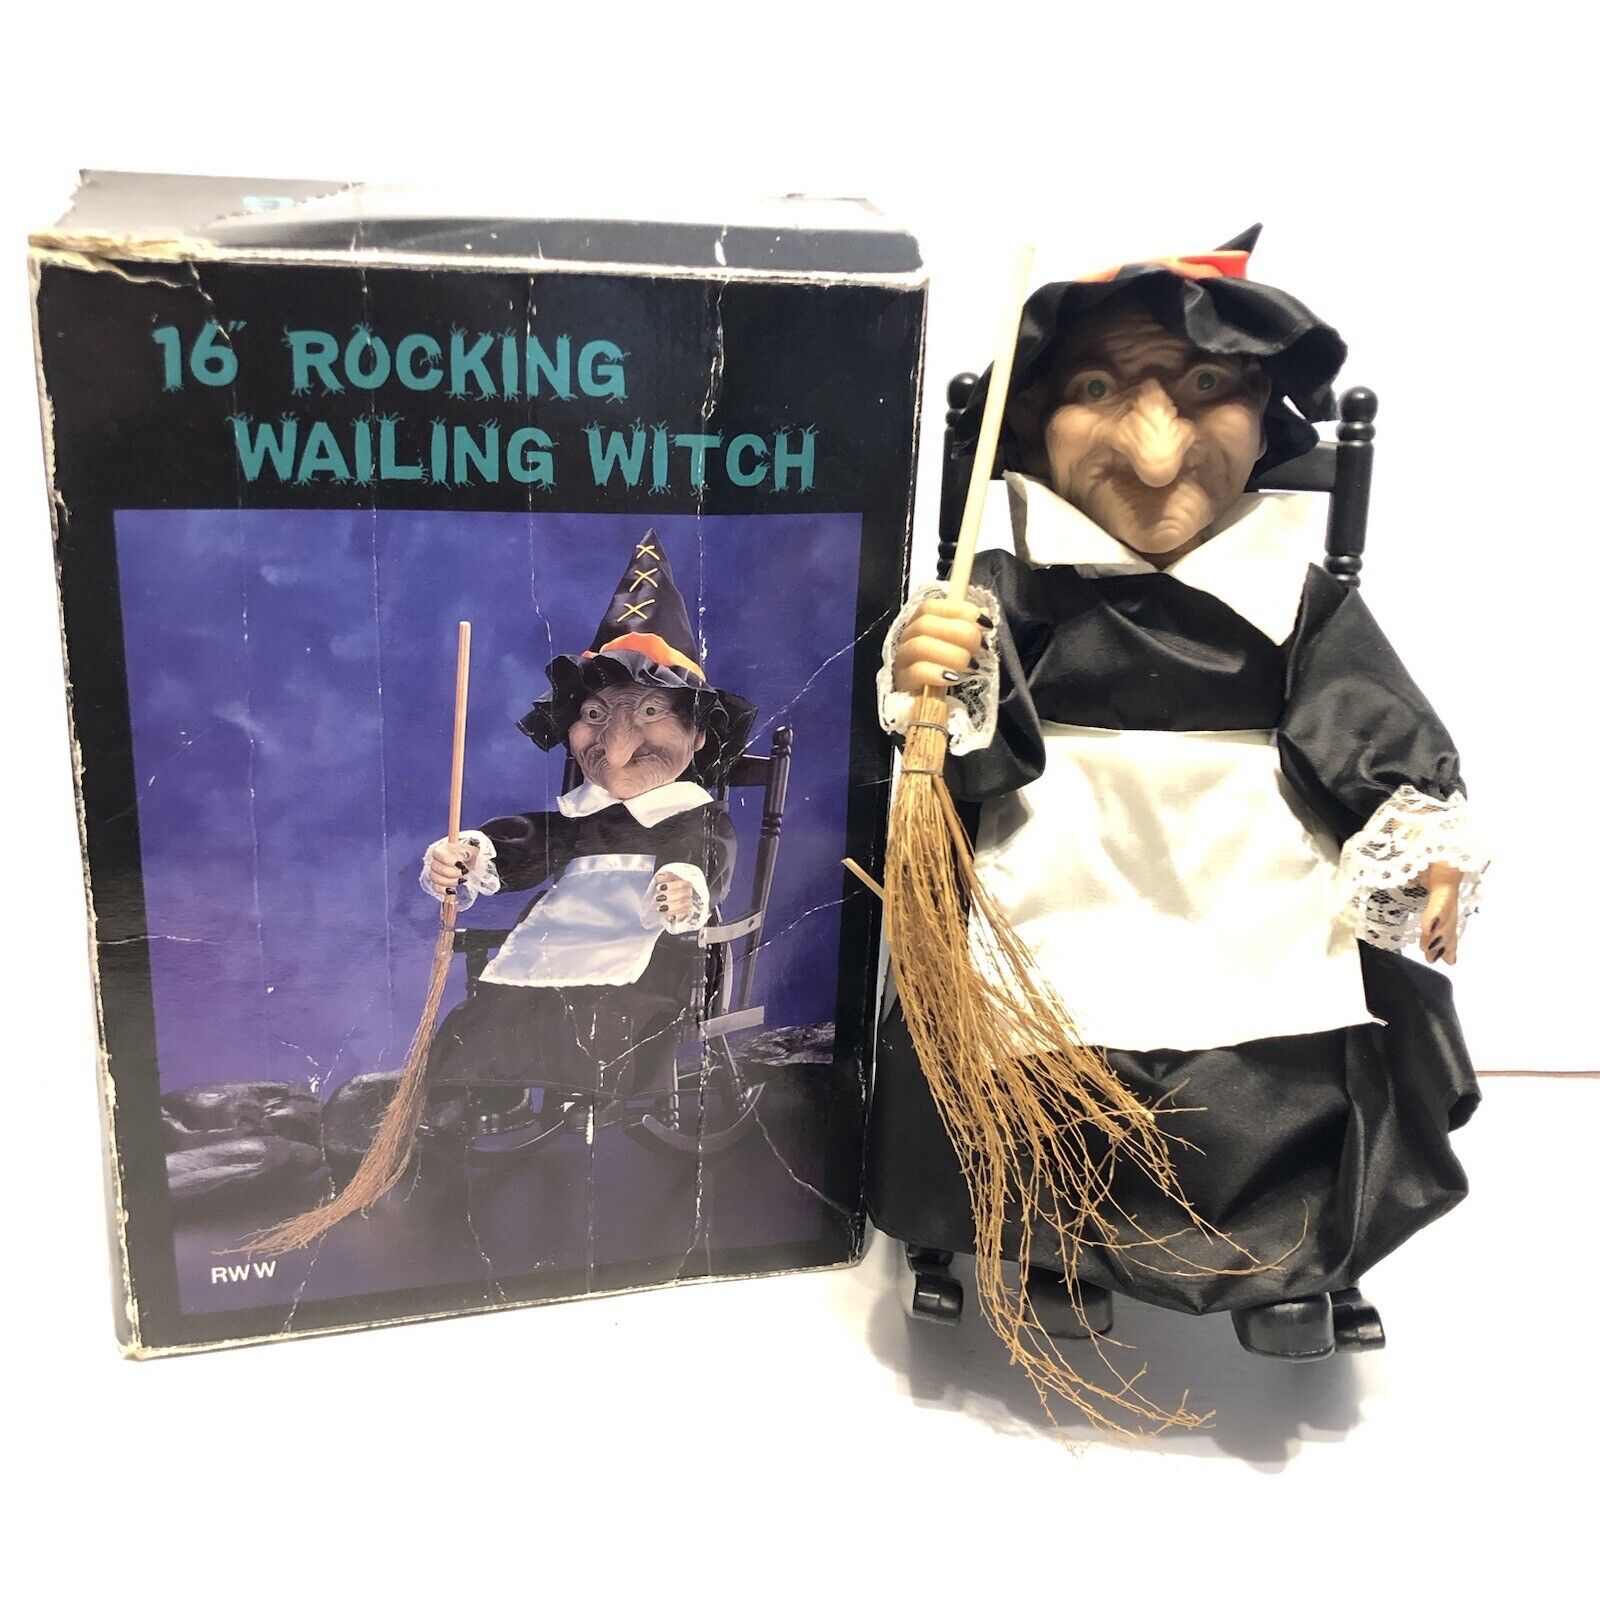 VTG Rocking Chair Wailing Witch Sound Activated Laughs Eyes Flash 16” See Video